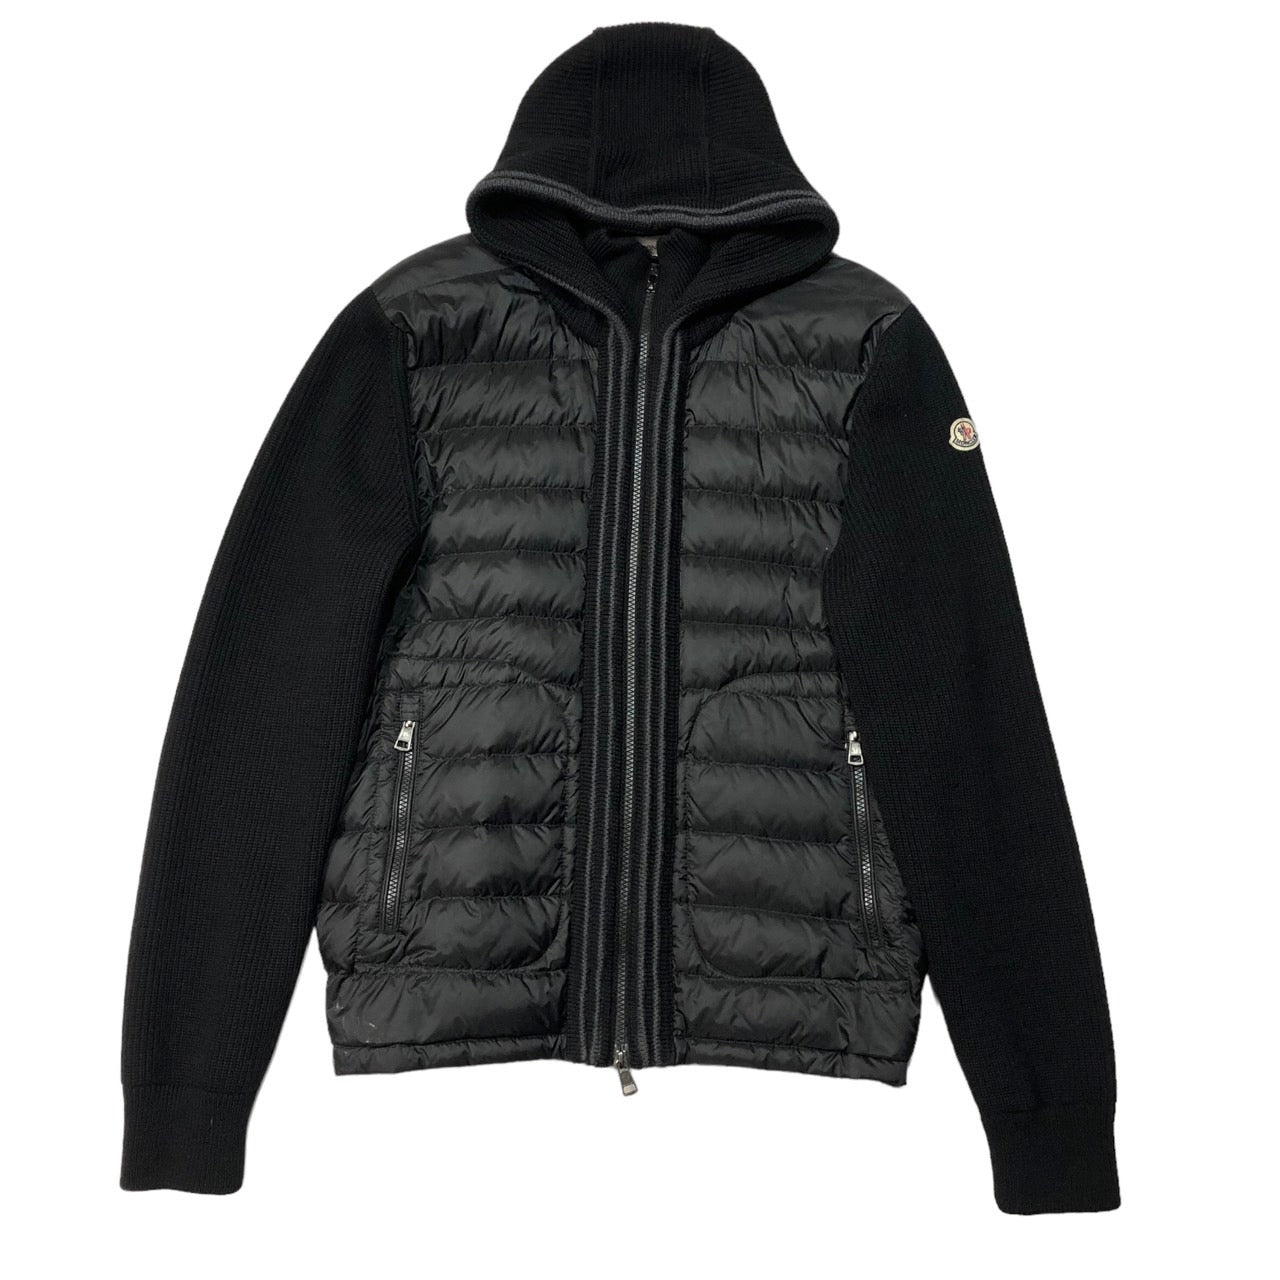 MONCLER(モンクレール) 16AW MAGLIONE TRICOT CARDIGAN/ニット ...